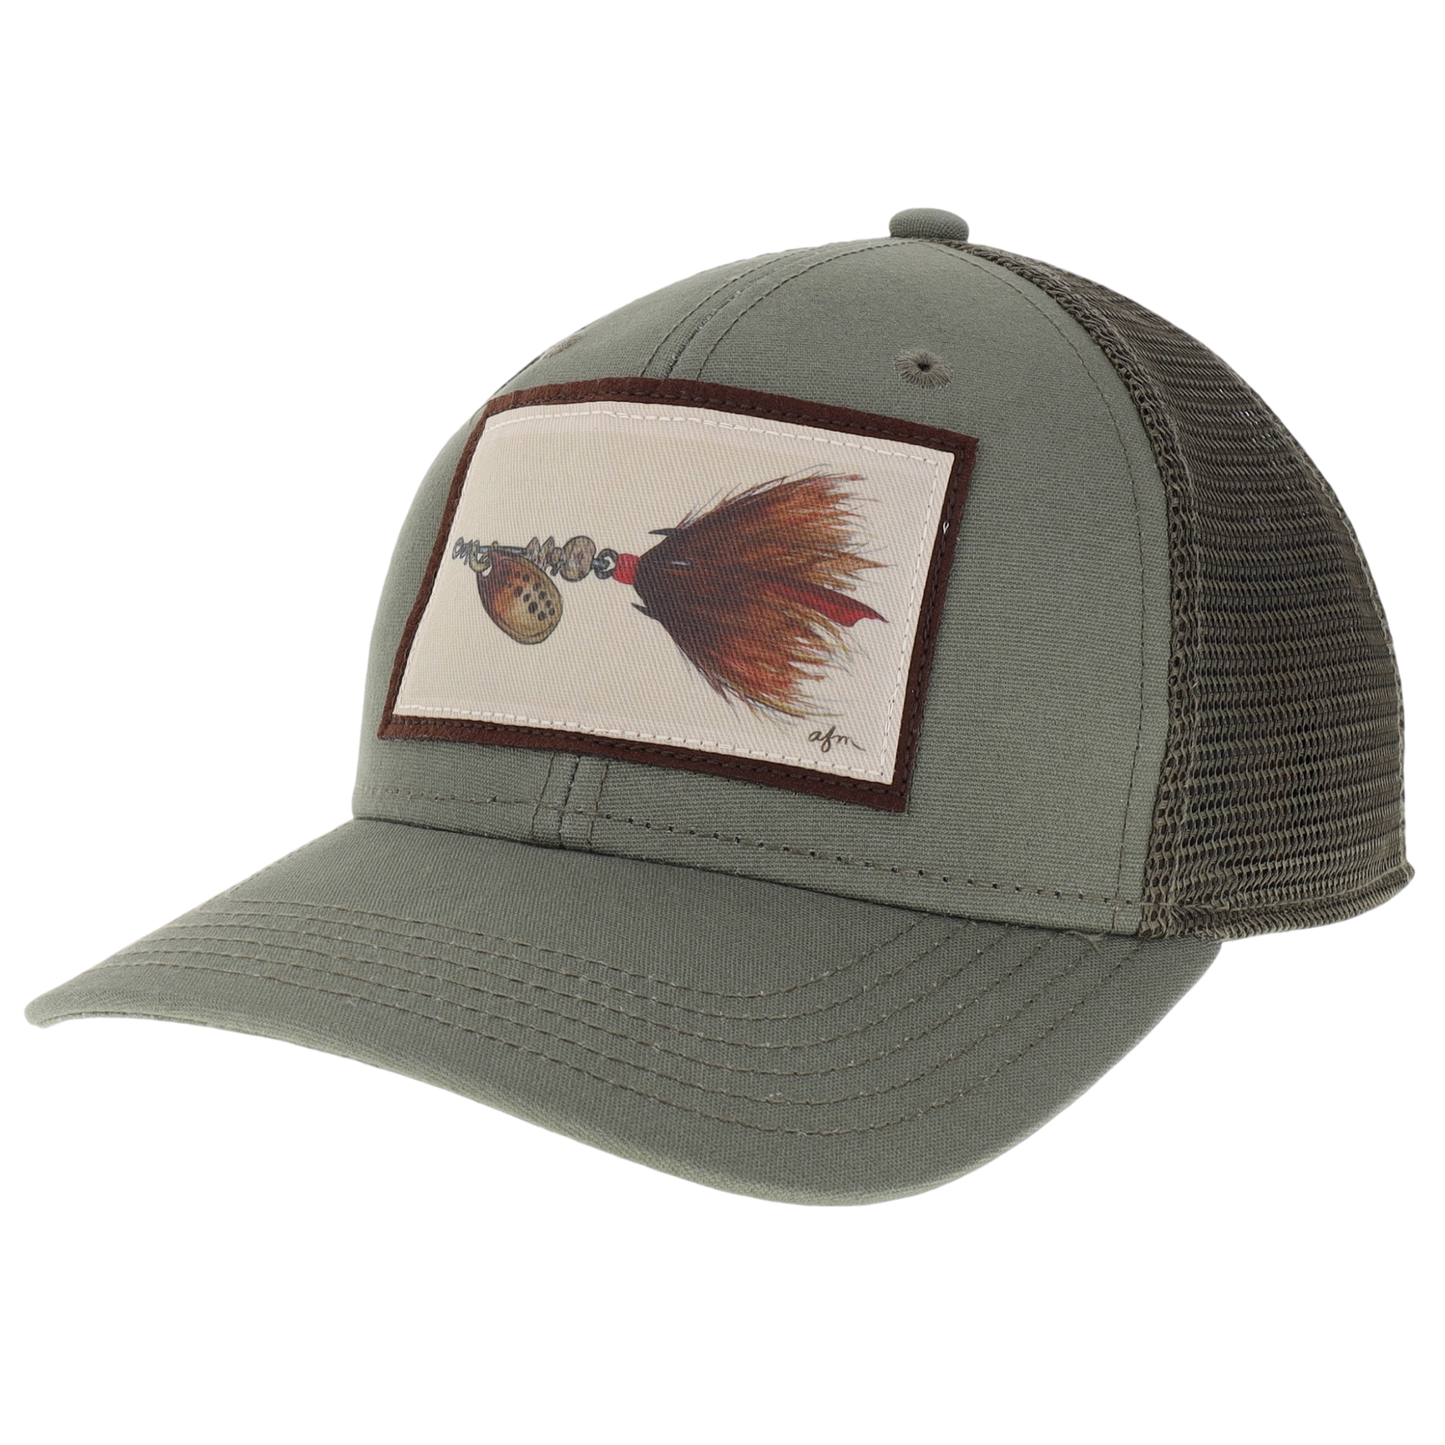 Spinner Lure Mid-Pro Trucker Hat in Olive/Olive